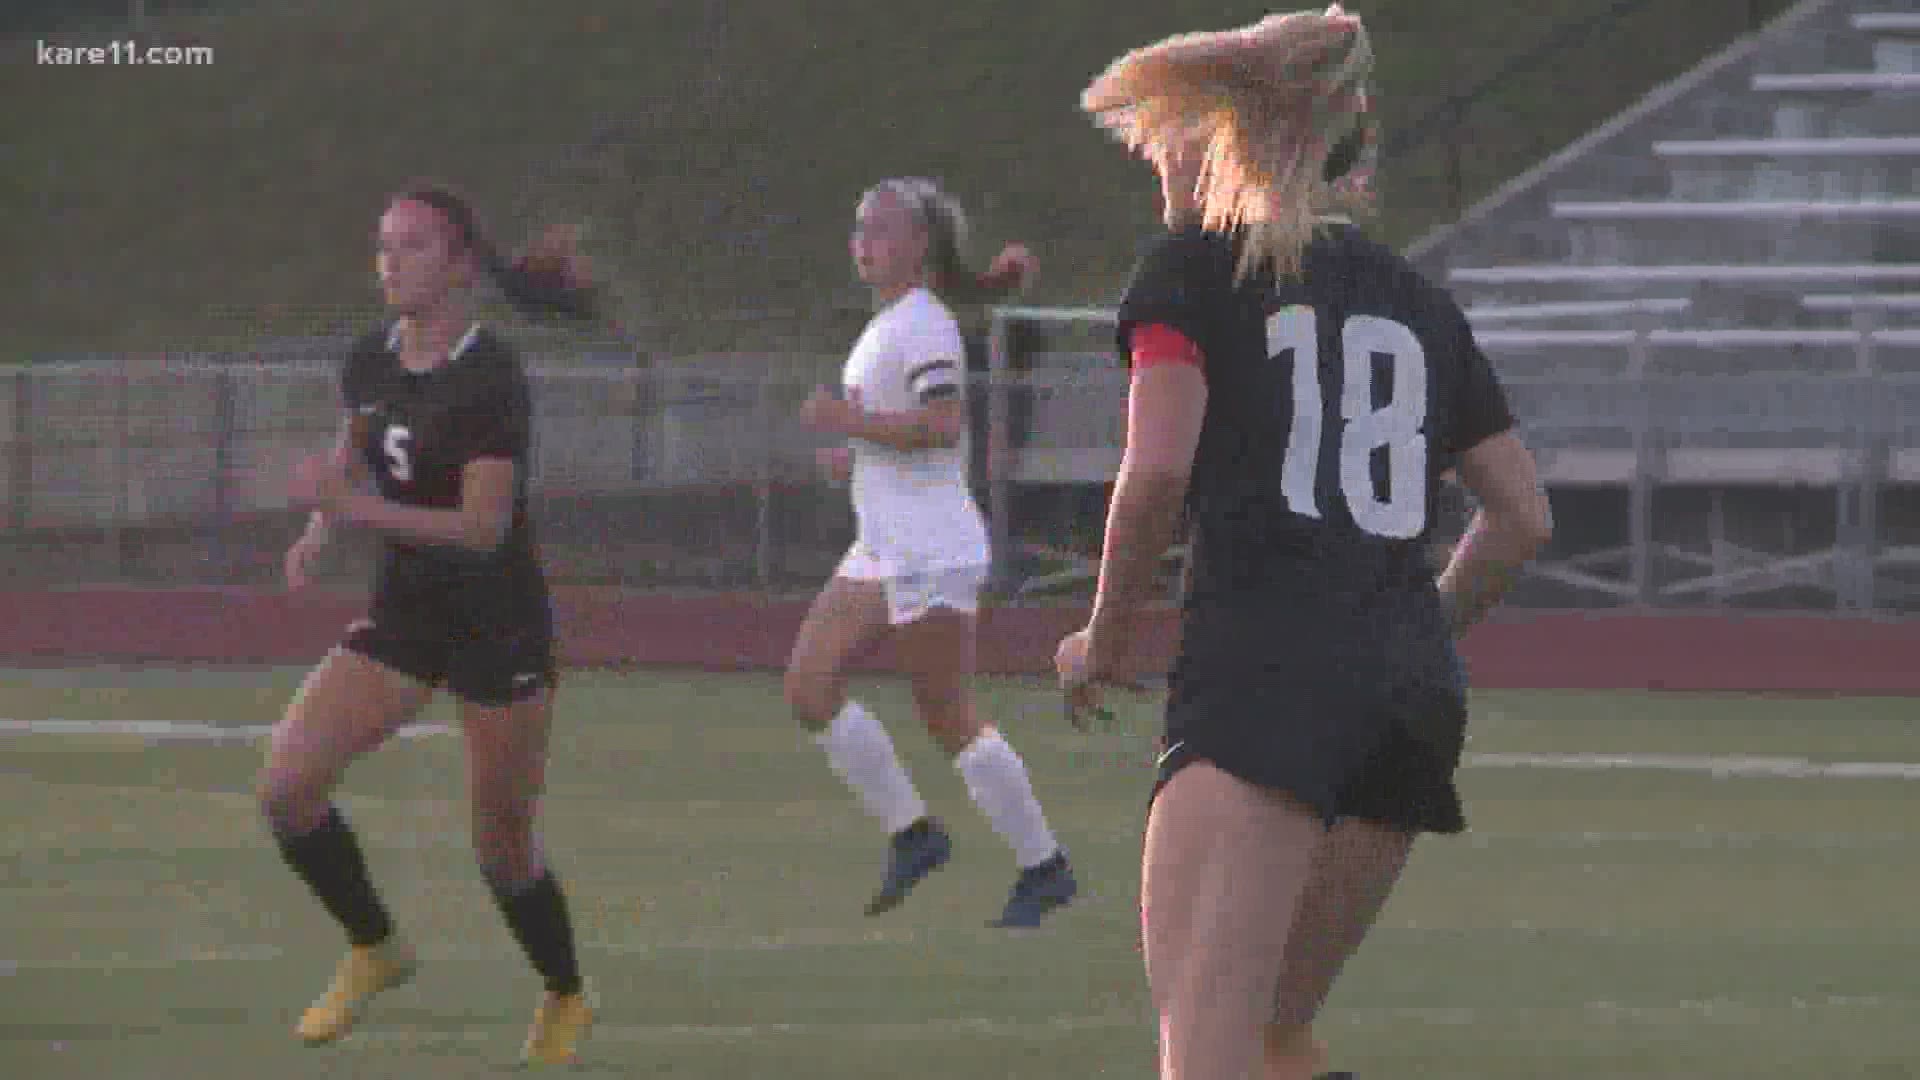 The Roseville Girls Soccer team is making a statement that is bigger than the game this fall, standing together against racial injustice in their community.